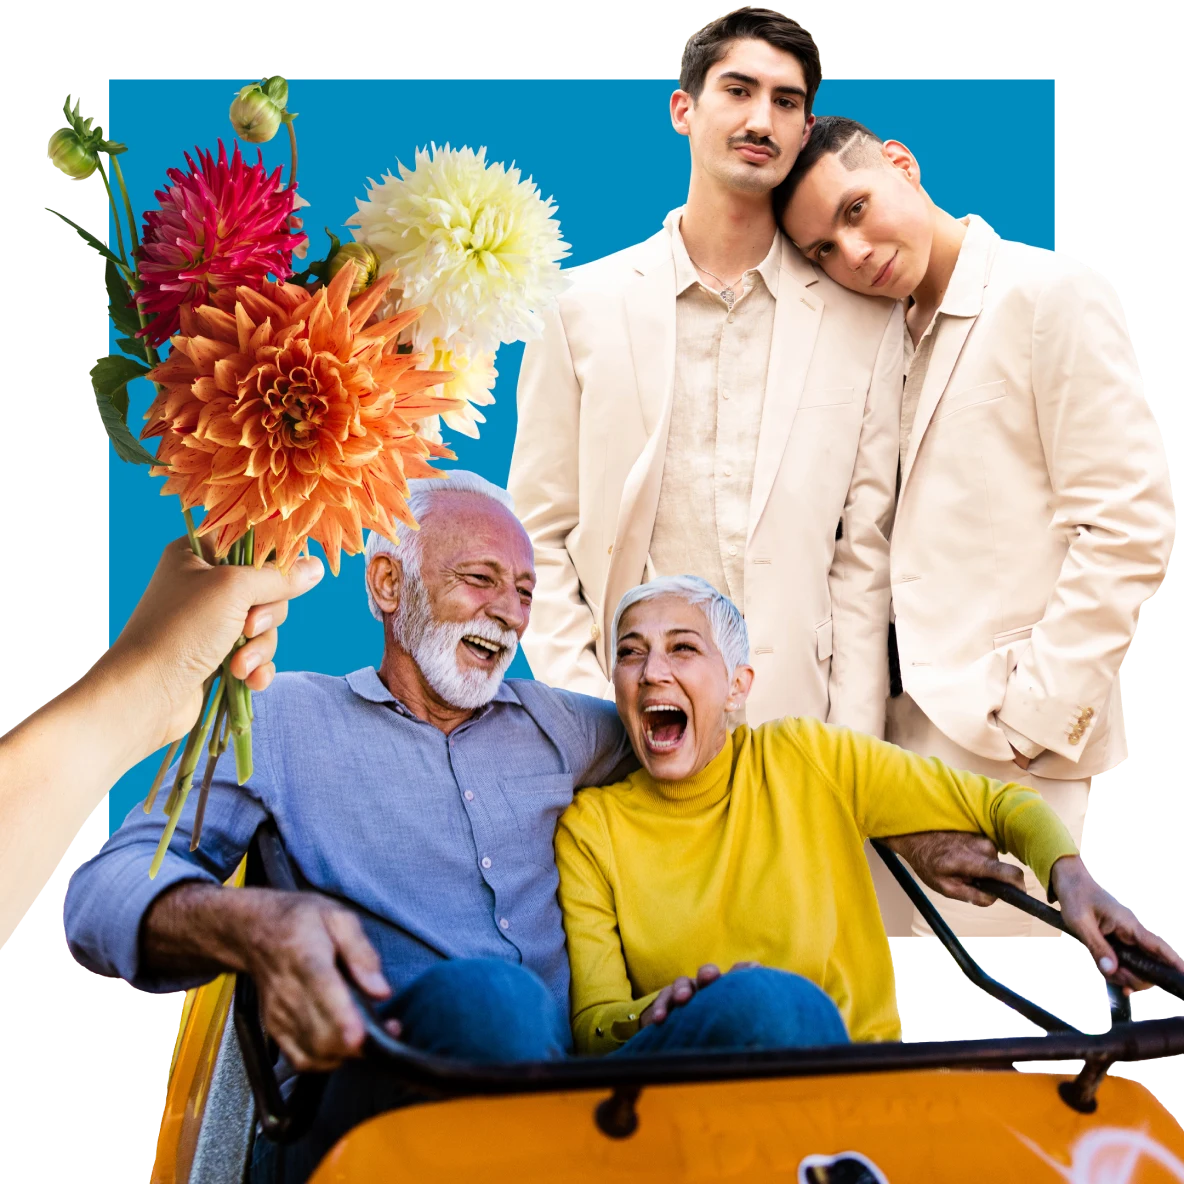 Two pairs of people. A white man and an Asian man wearing tan suits are on right, one with his head on the other’s shoulder. A white hand holds a bouquet of flowers on the left. An older white man and woman are in an orange rollercoaster car in the foreground.
